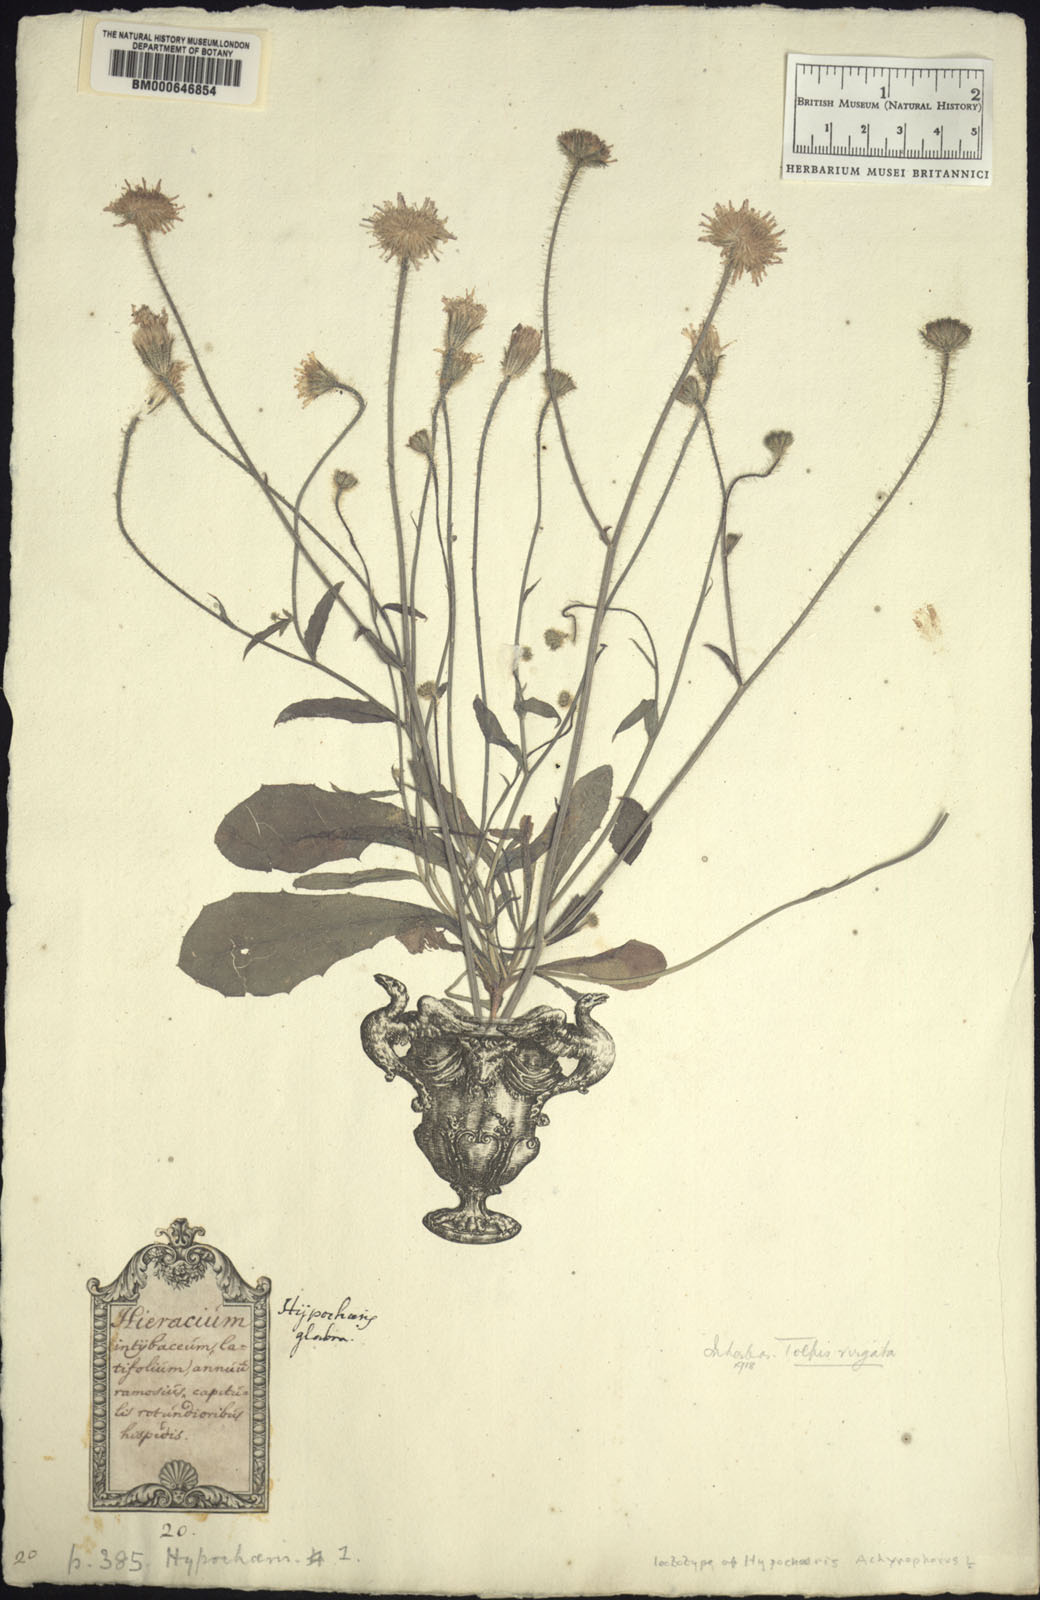 http://www.nhm.ac.uk//resources/research-curation/projects/clifford-herbarium/lgimages/BM000646854.JPG